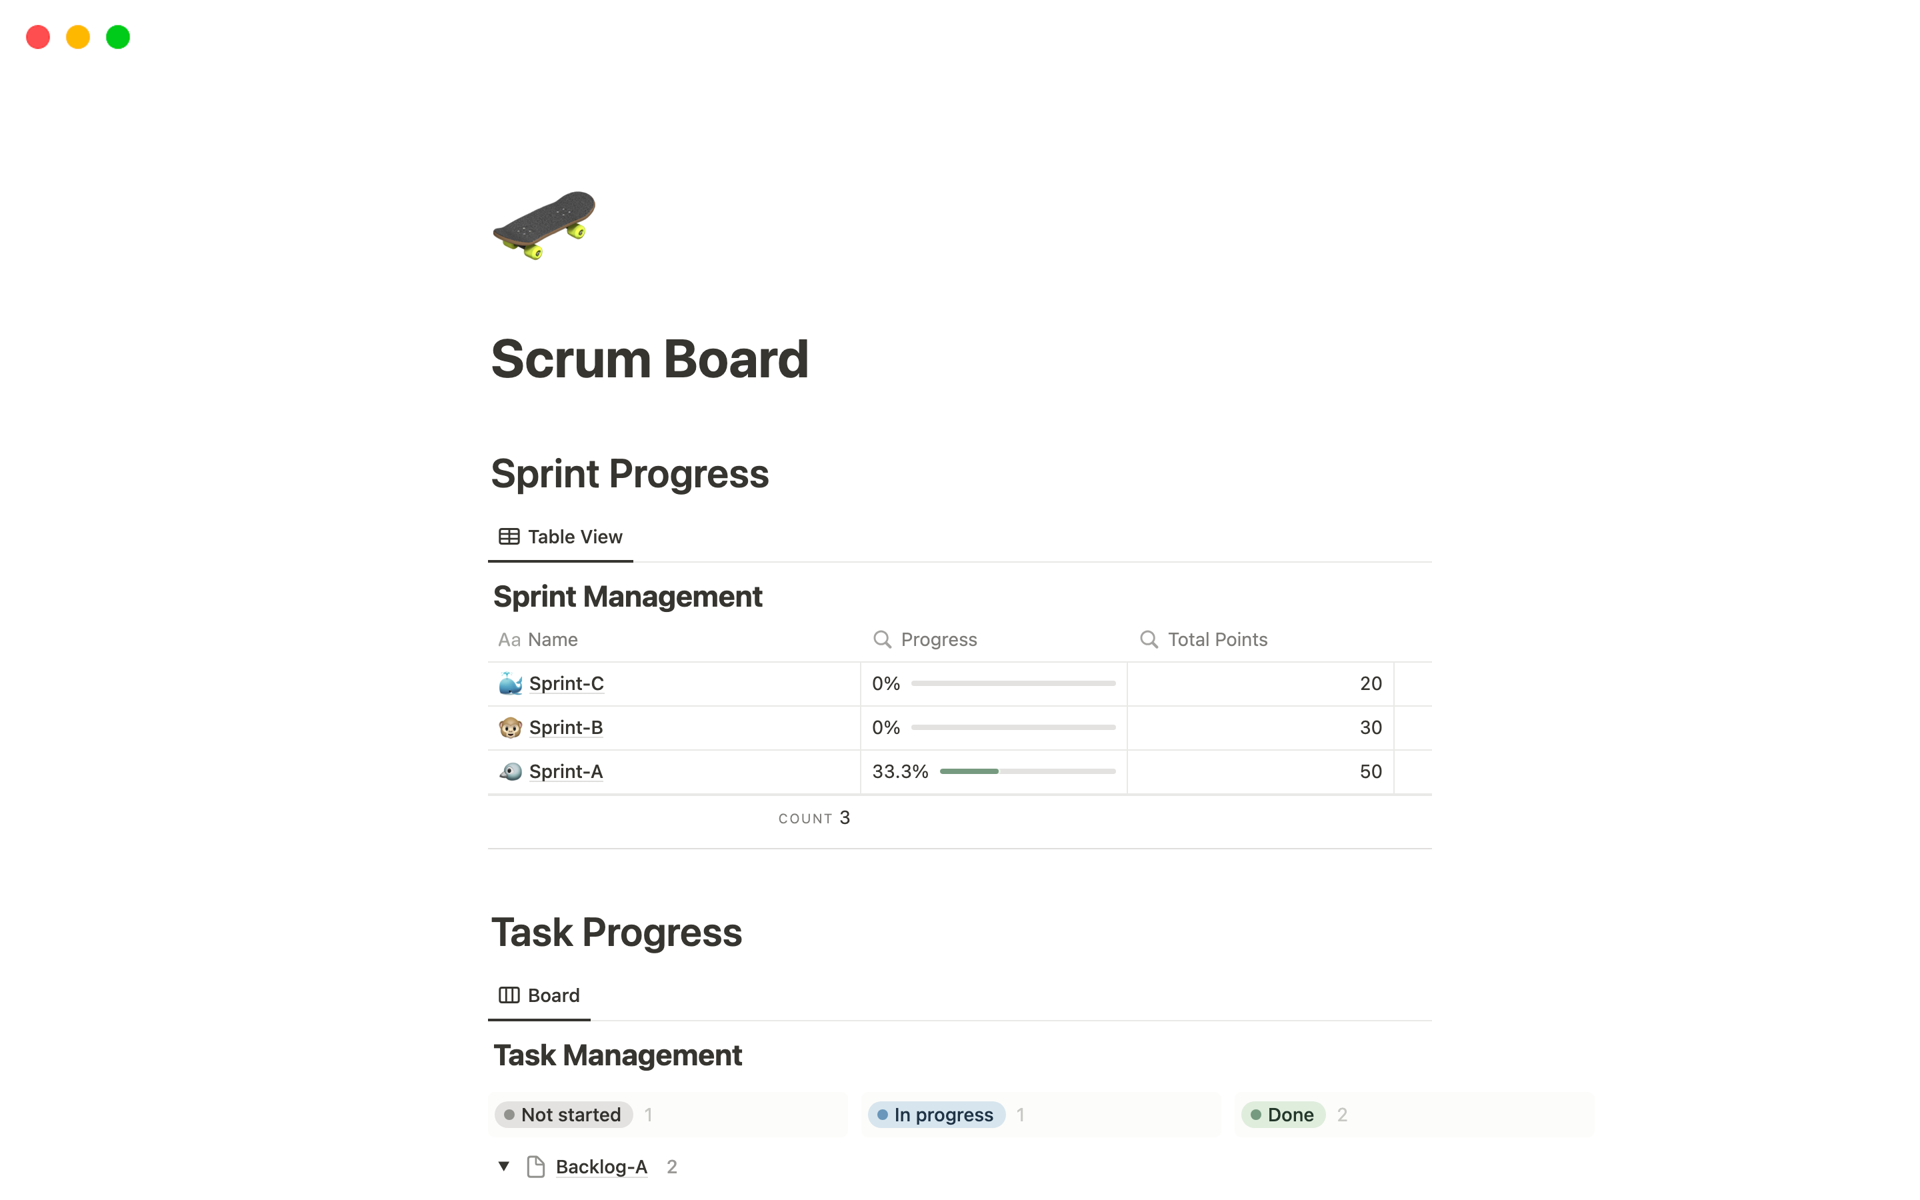 This is a customized Scrum template.